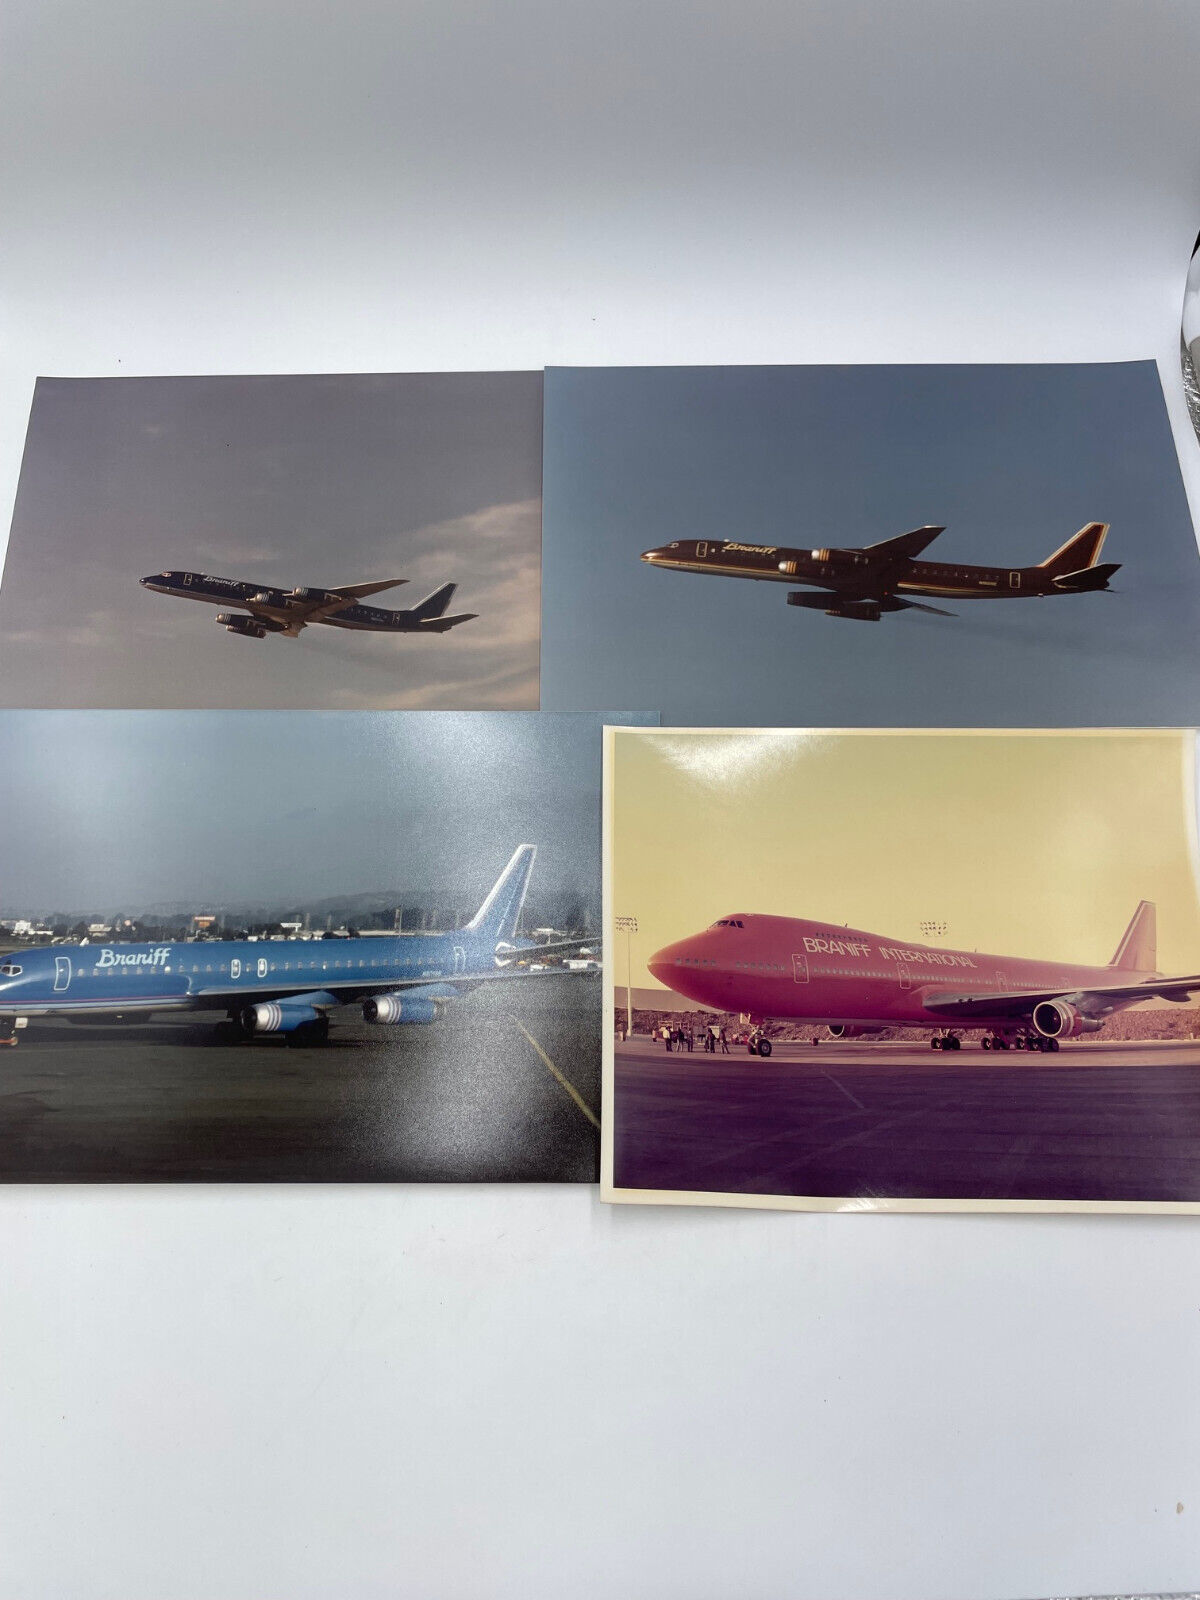 Lot of 4 Vintage Braniff International Airlines Airplane Jet Pictures Photos